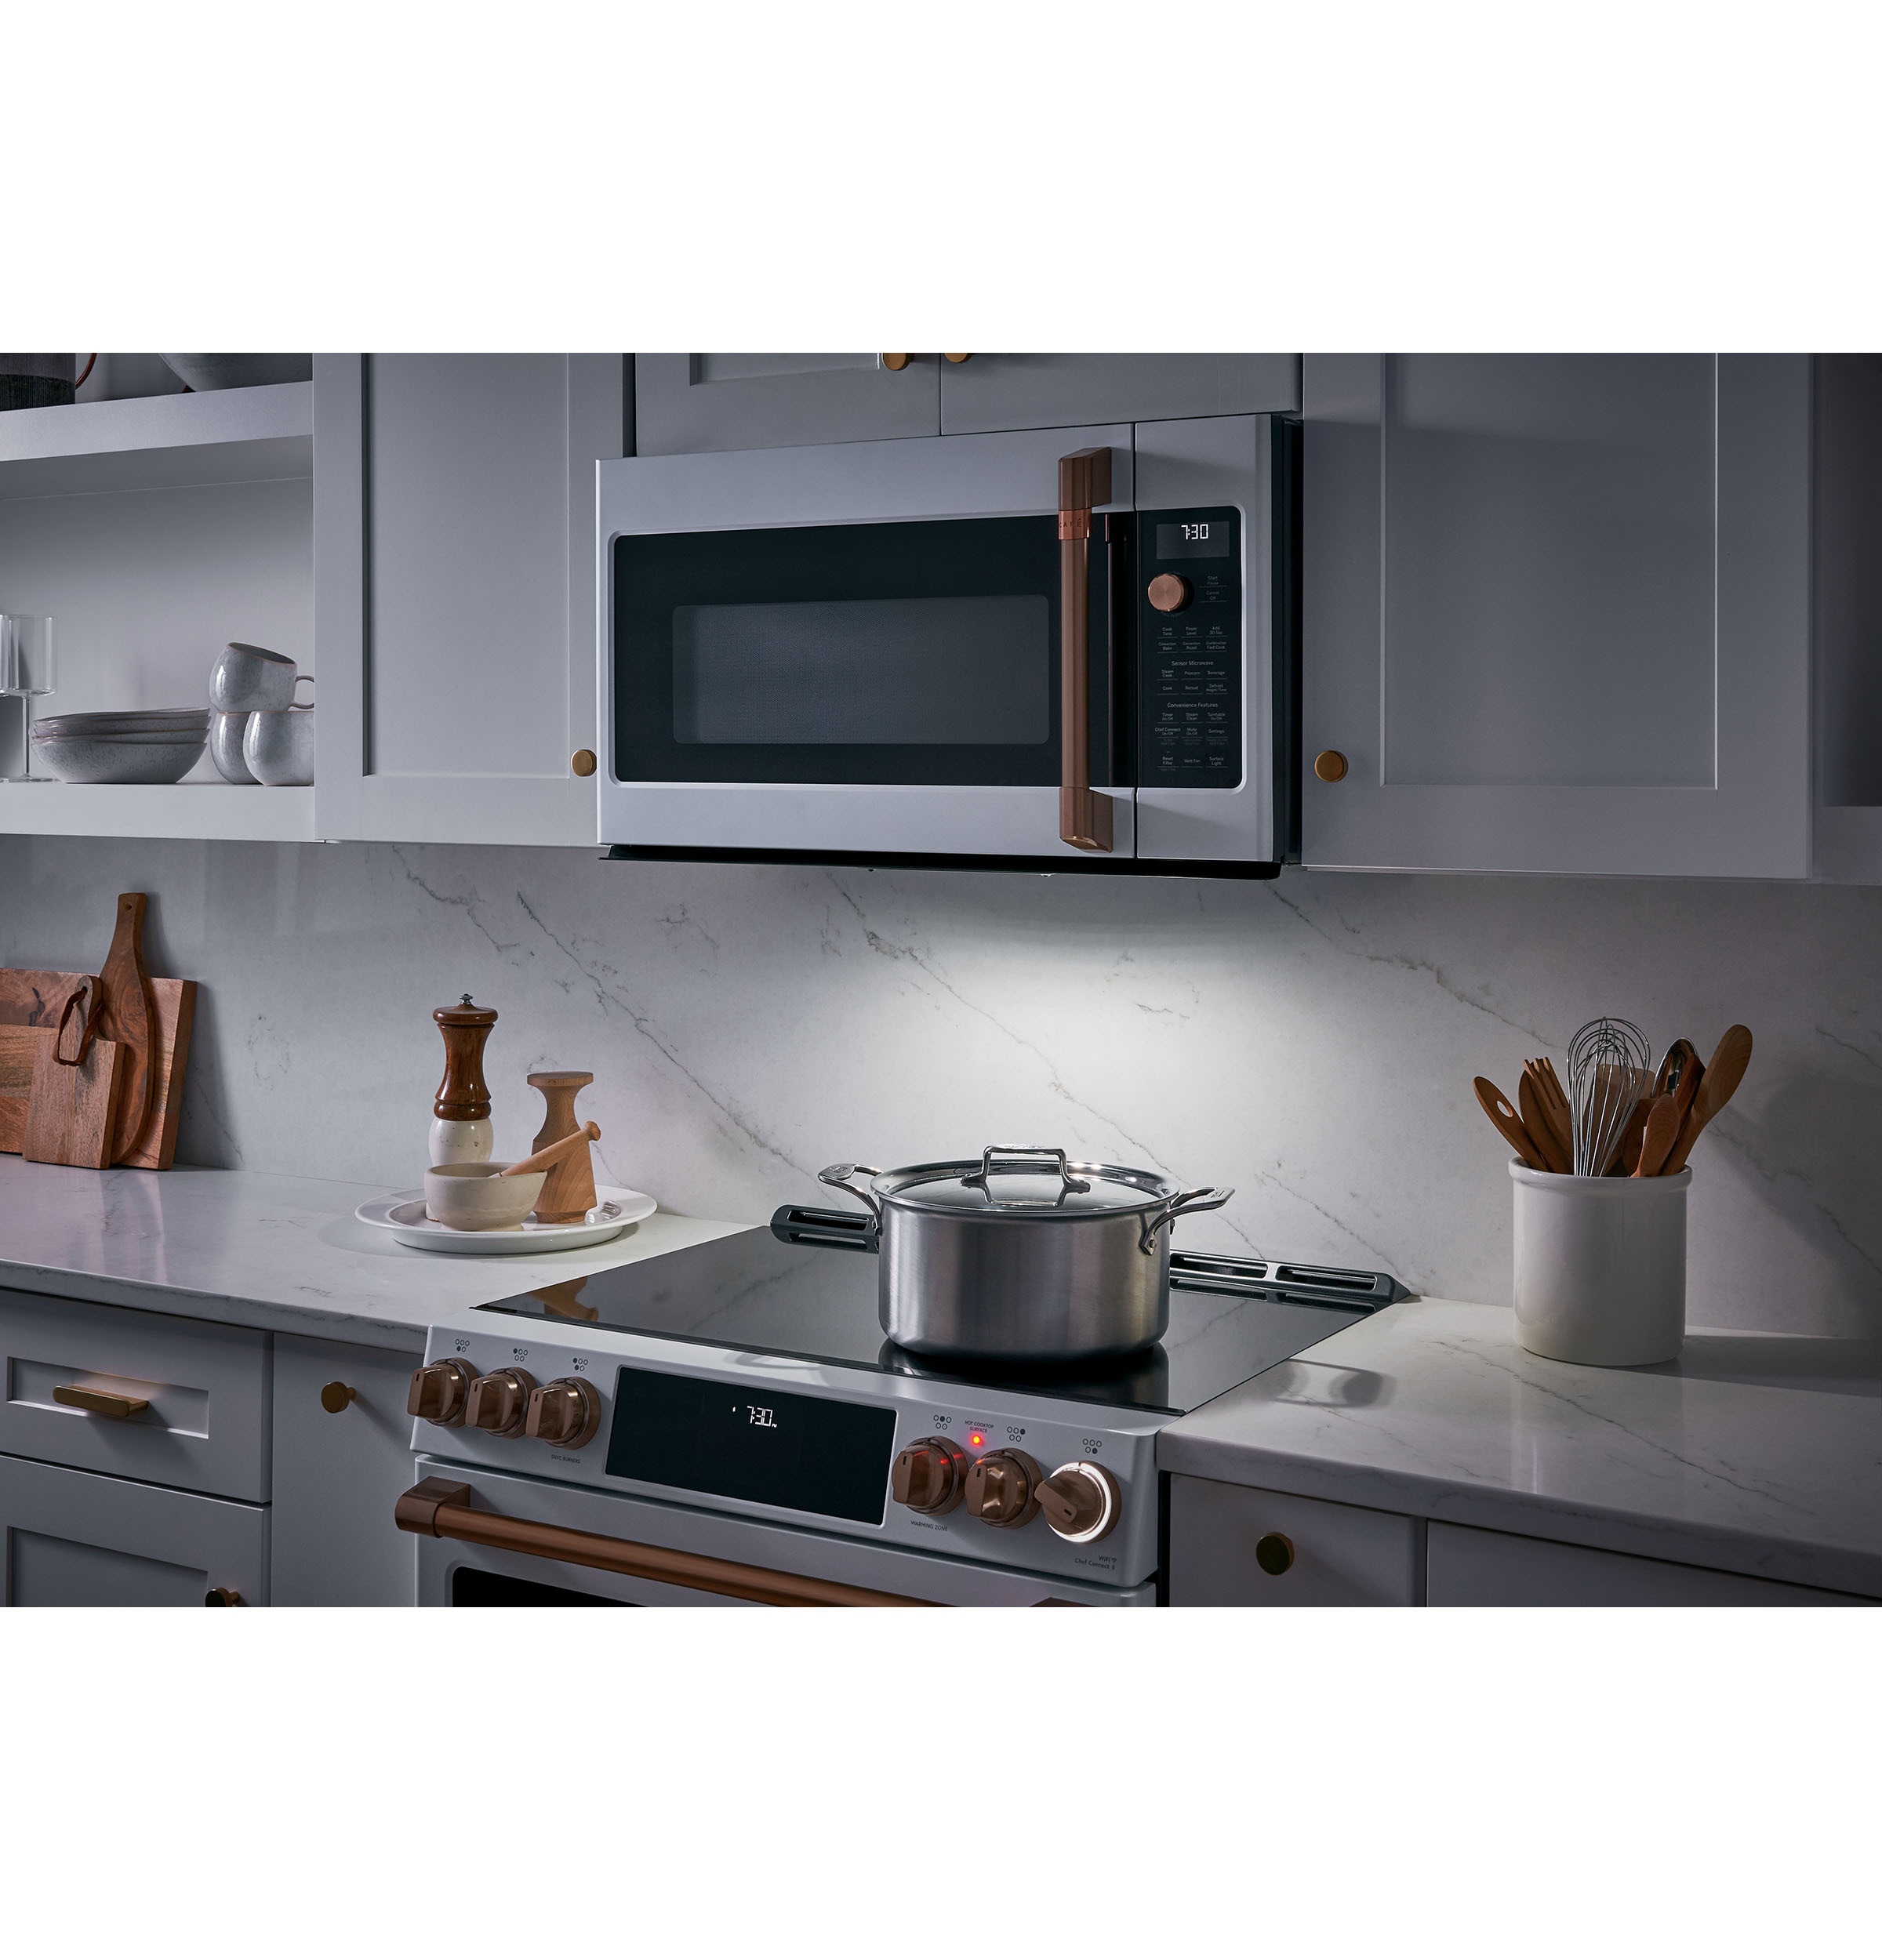 GE Cafe 2.1 Cu. Ft. Over The Range Microwave Oven in Stainless Steel with  Brushed Stainless Handles